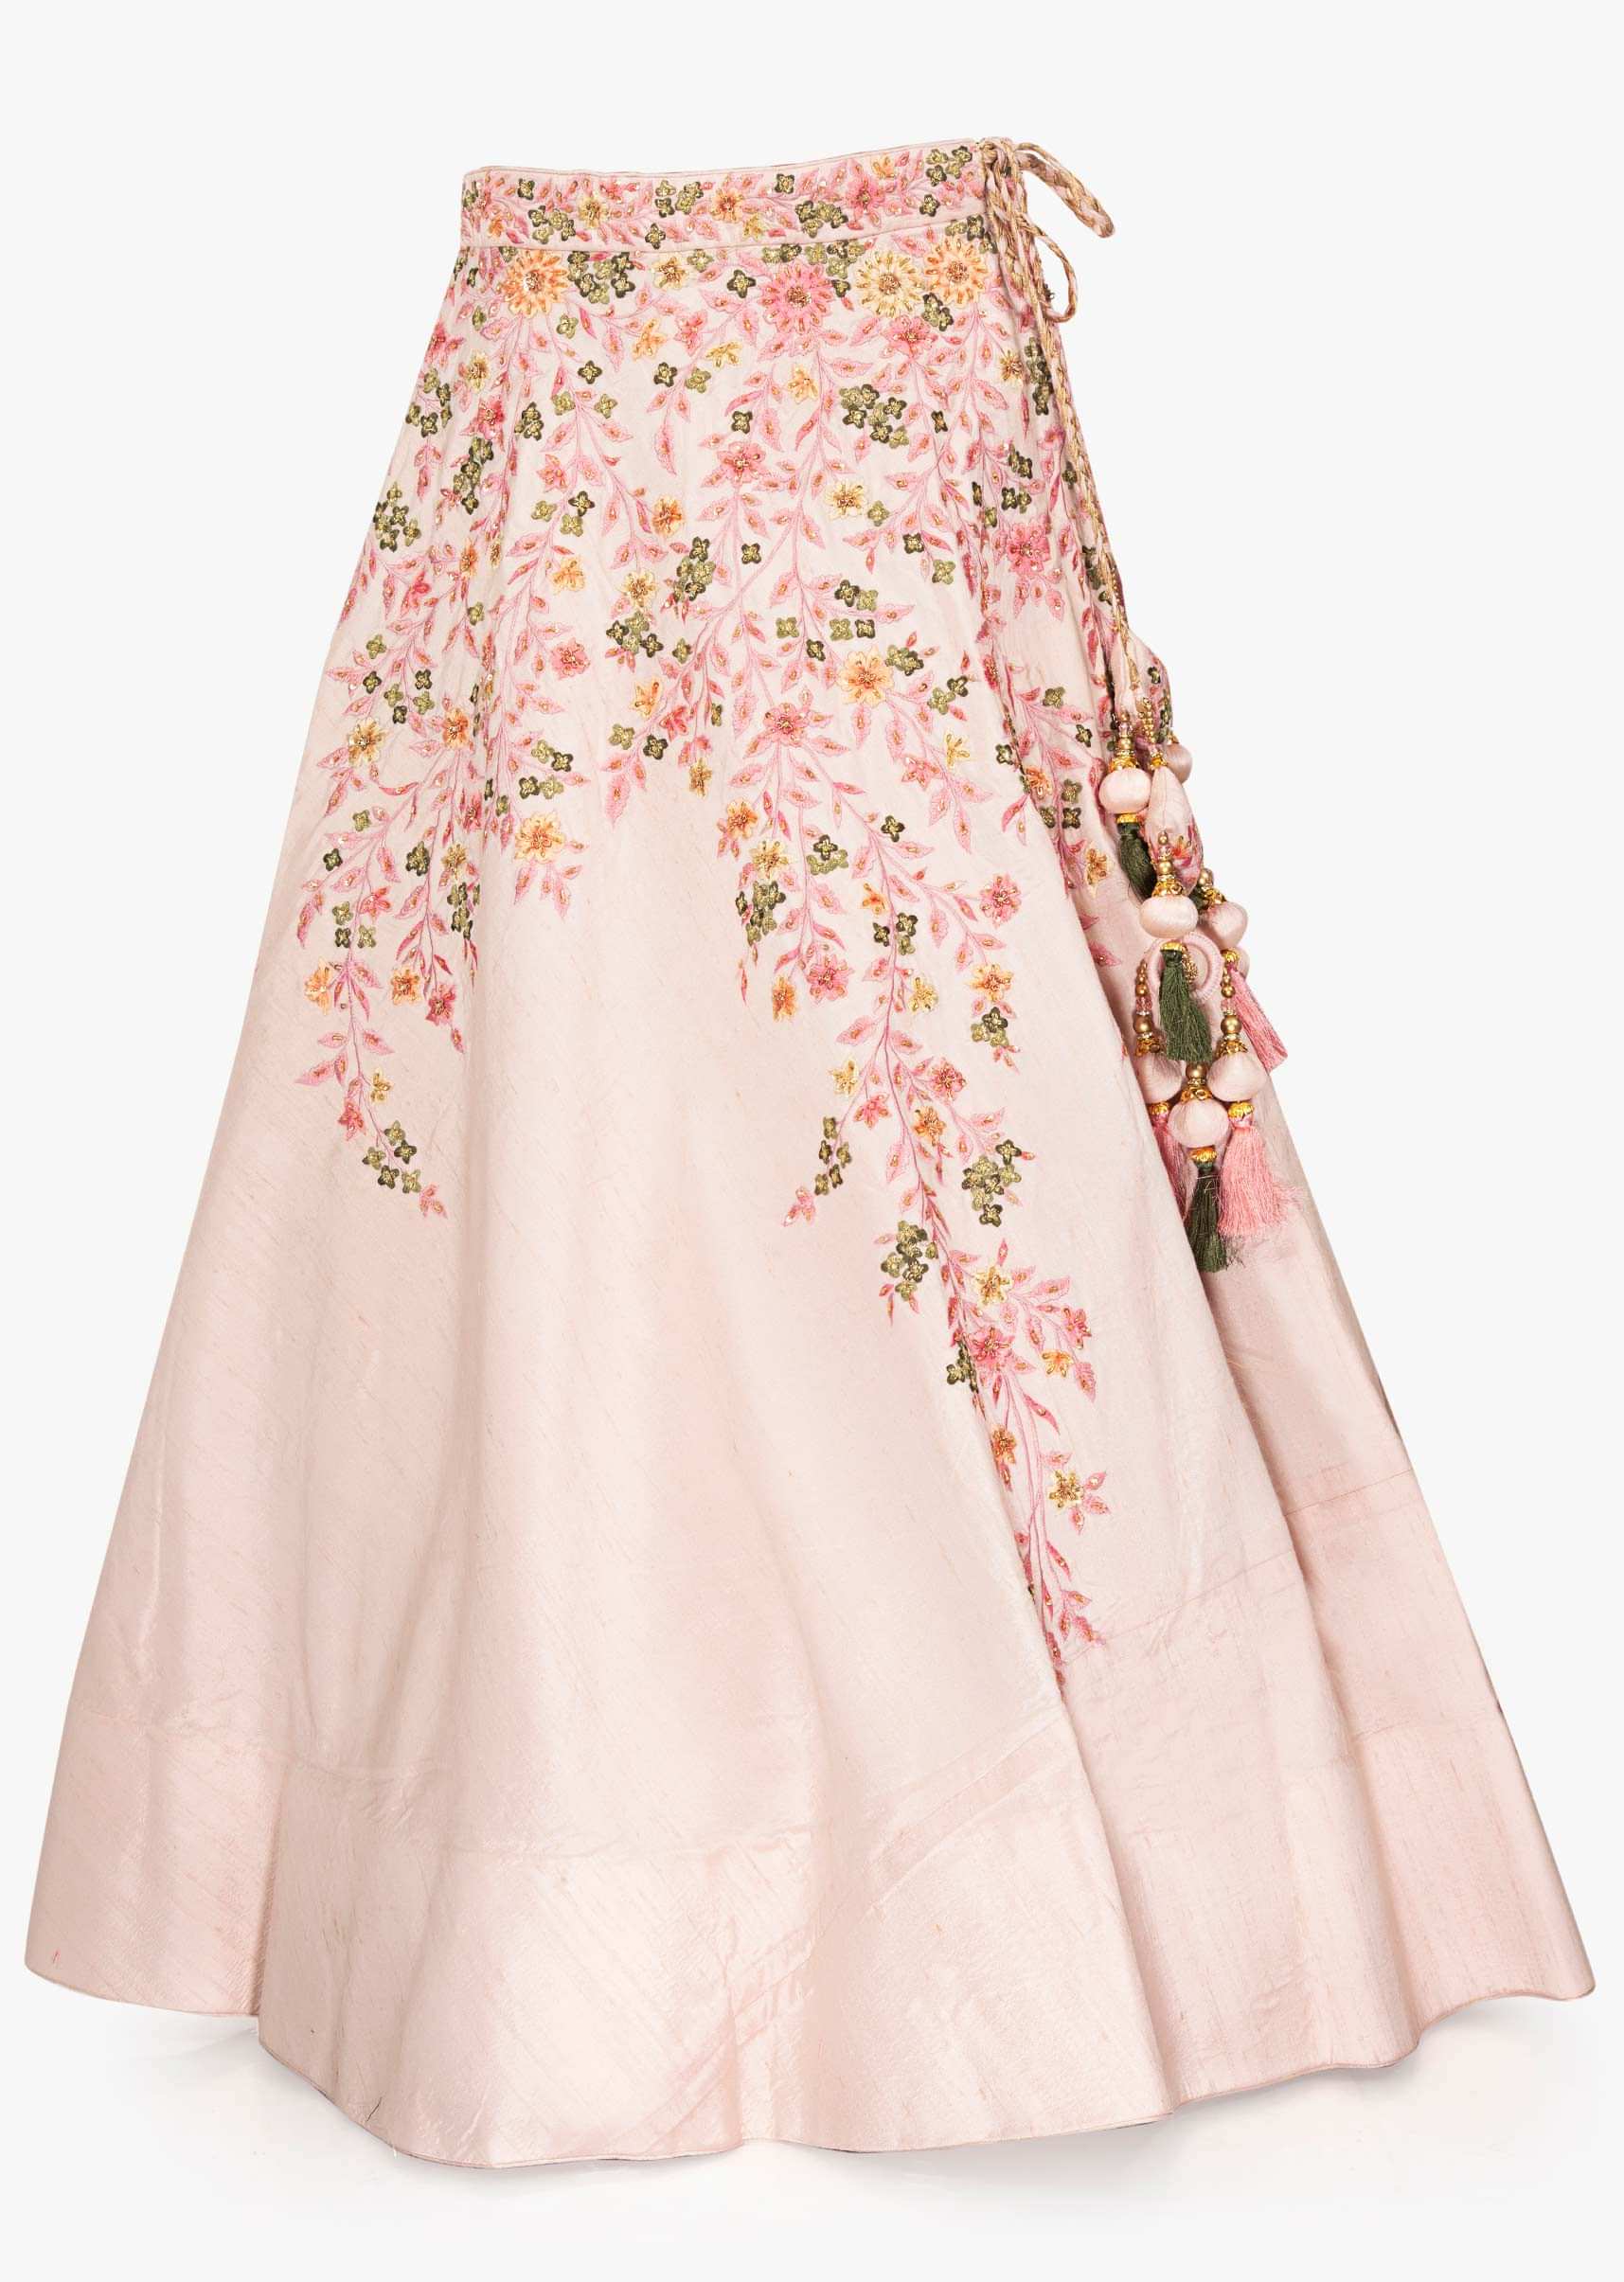 Powder pink lehenga paired with a matching blouse with a preattached net jacket